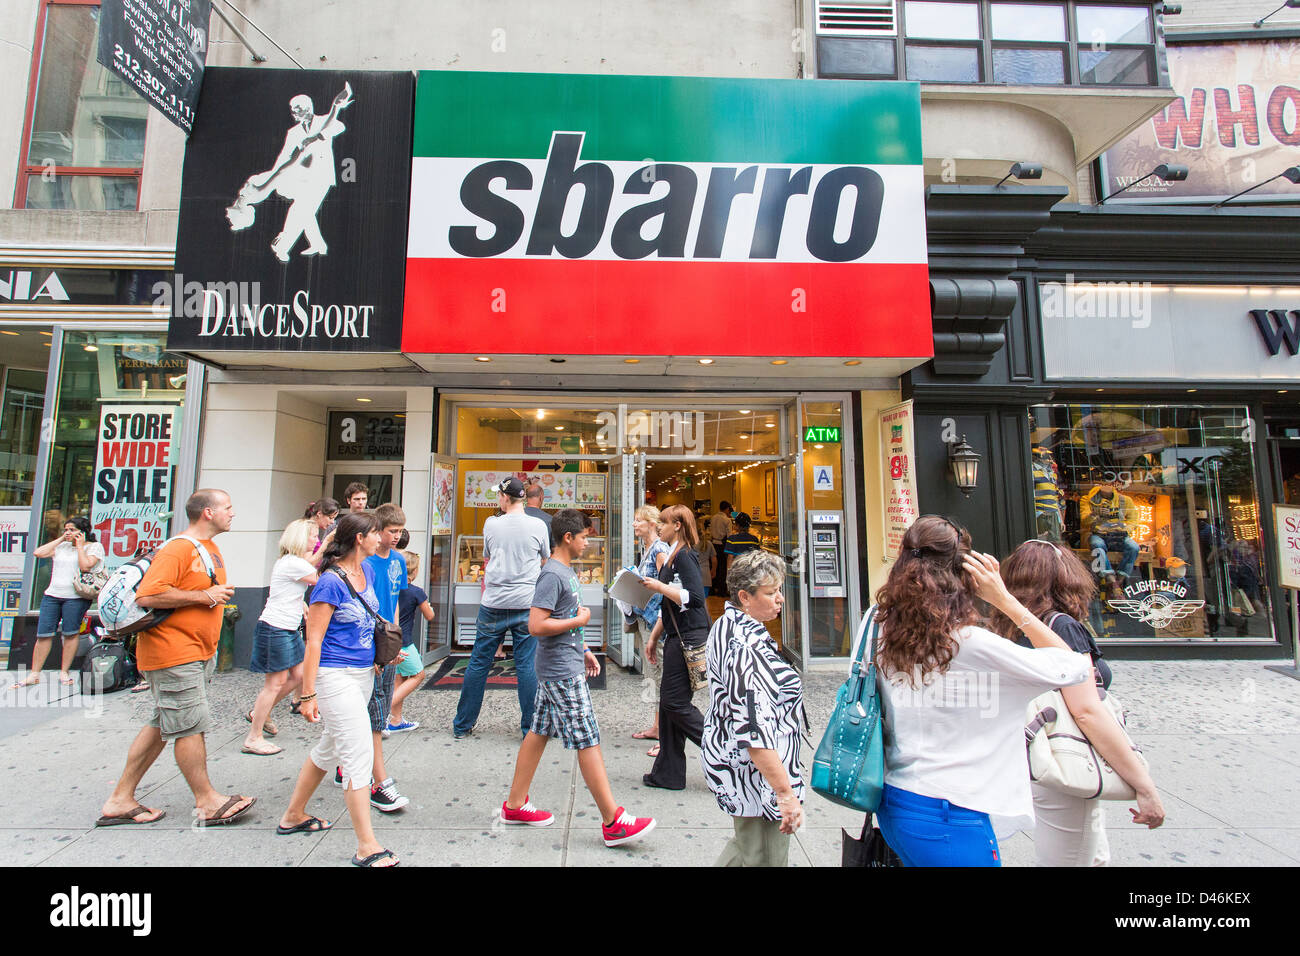 People walking on the sidewalk at the front of Sbarro pizzeria in New York City Stock Photo